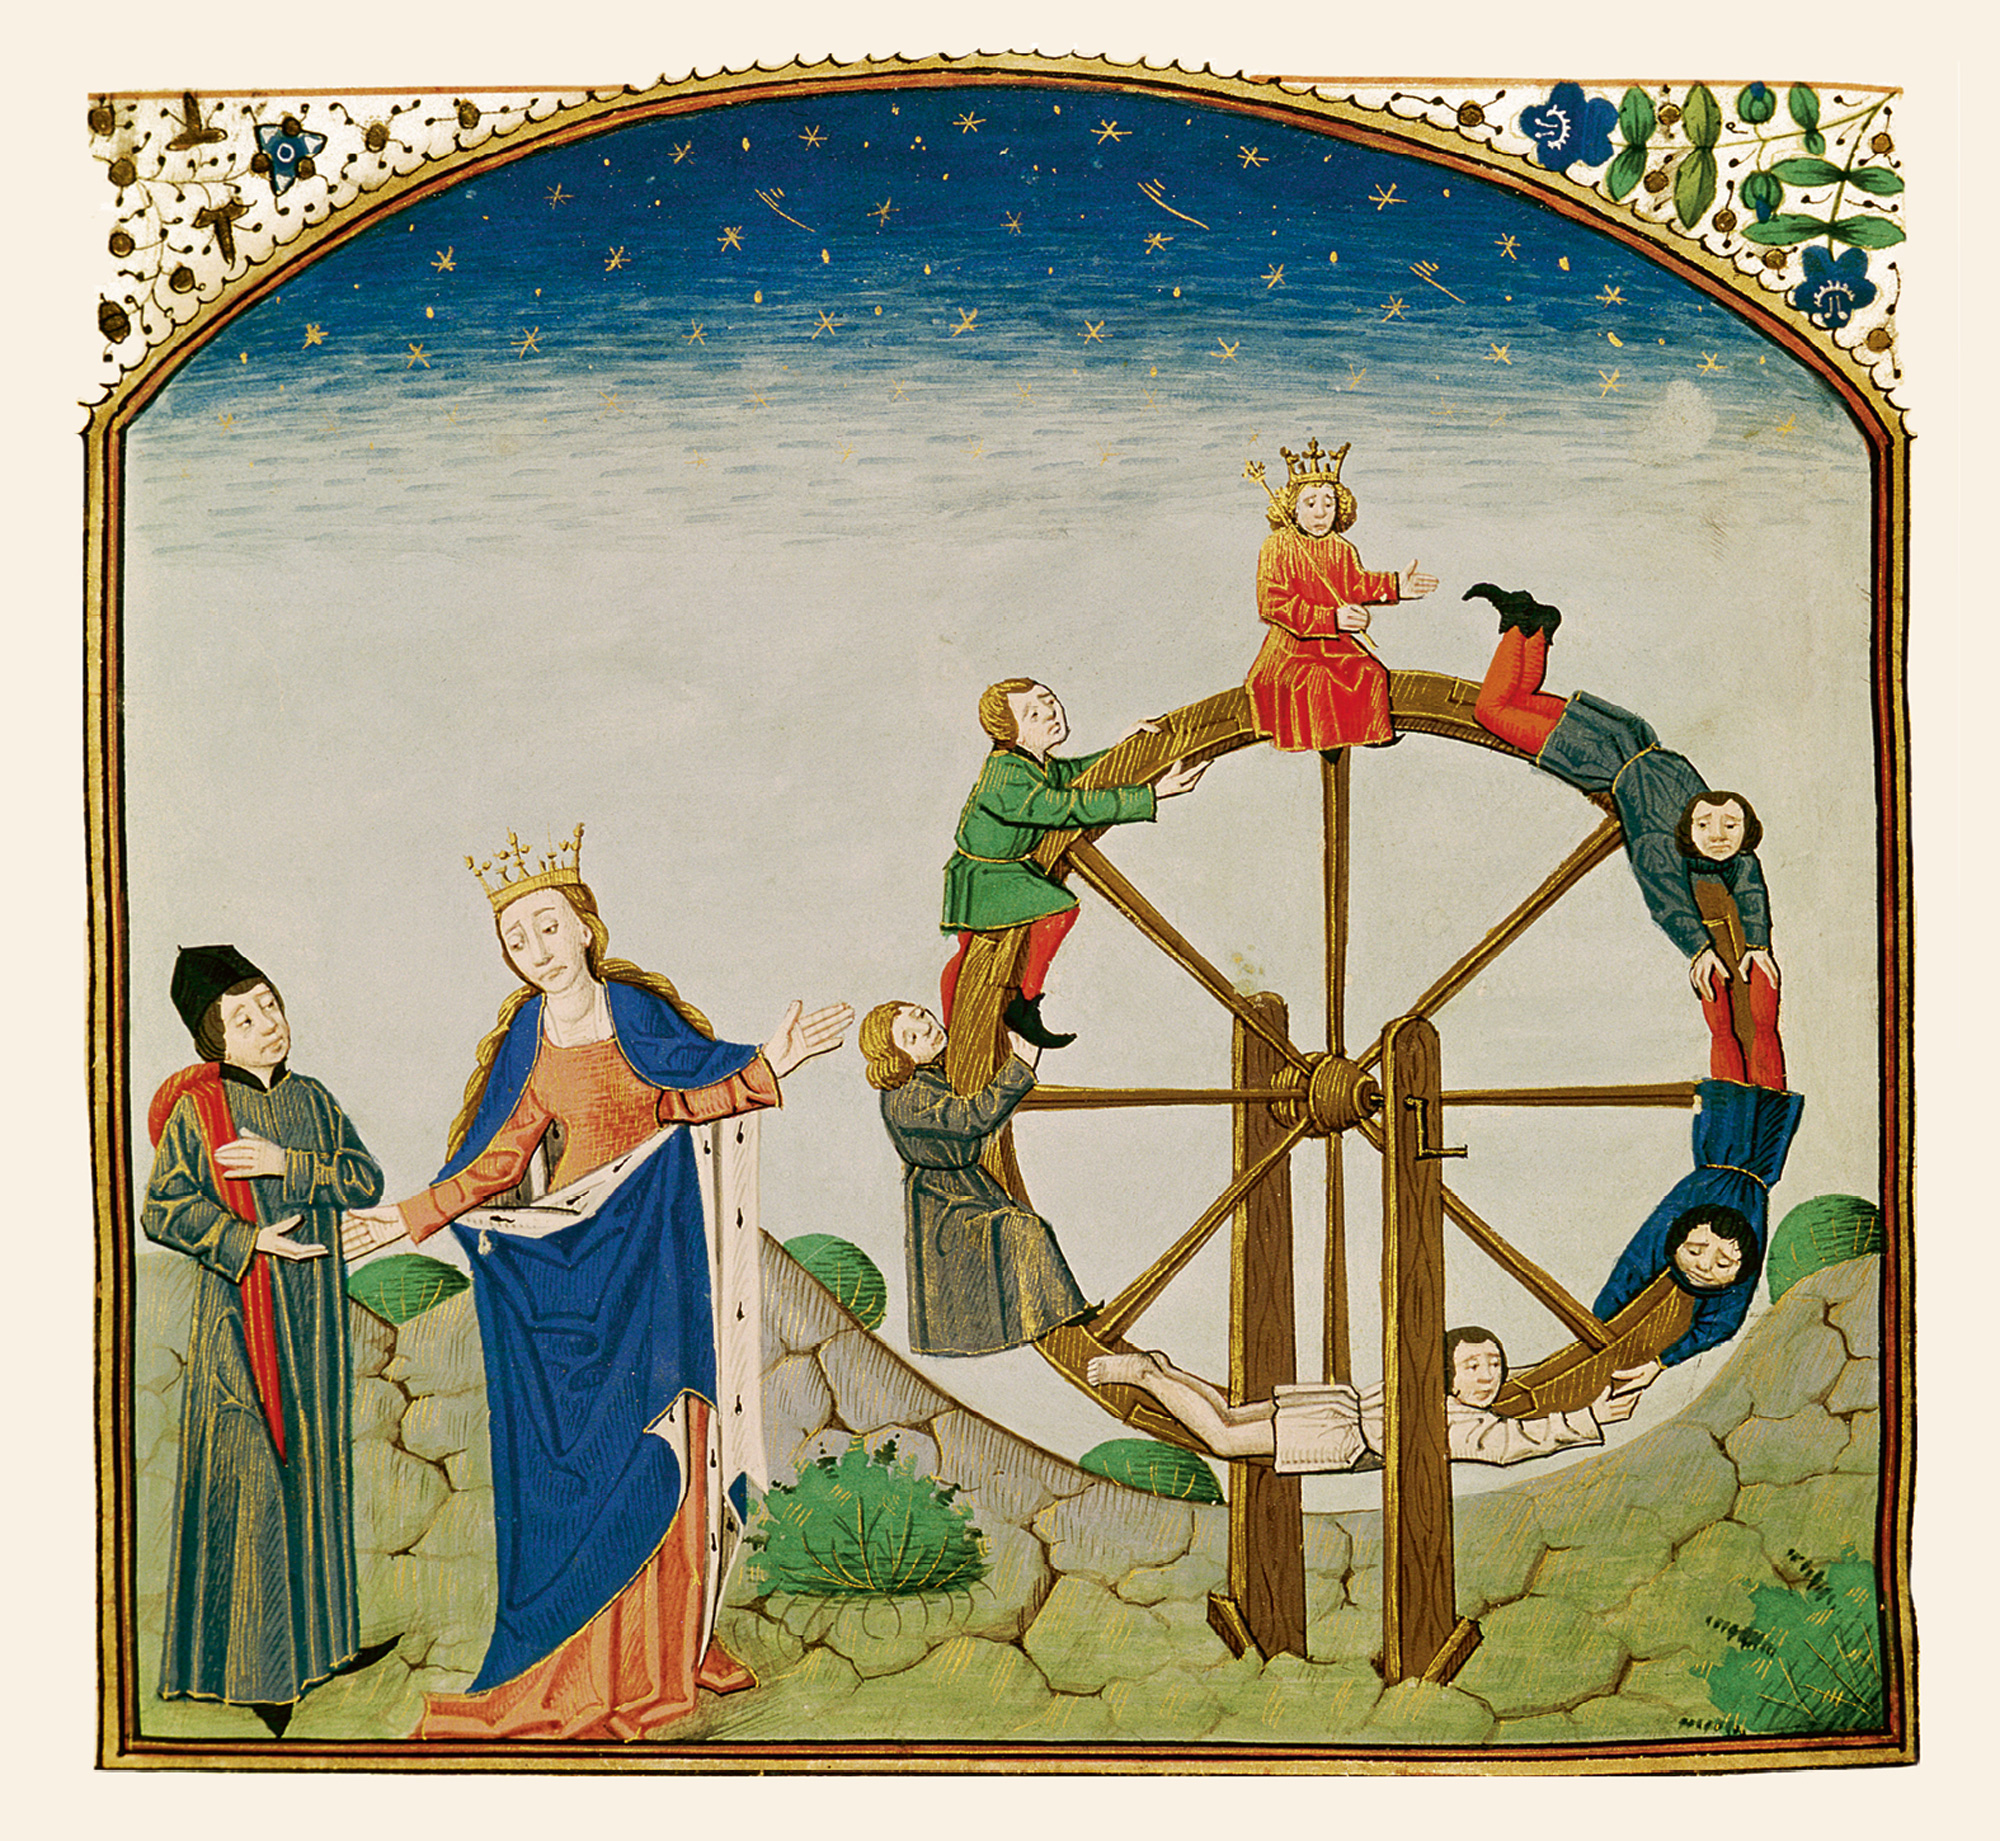 An illustration of Boethius with the wheel of fortune considering his options, from a fifteenth-century French translation of “De Consolatione Philosophiae.”